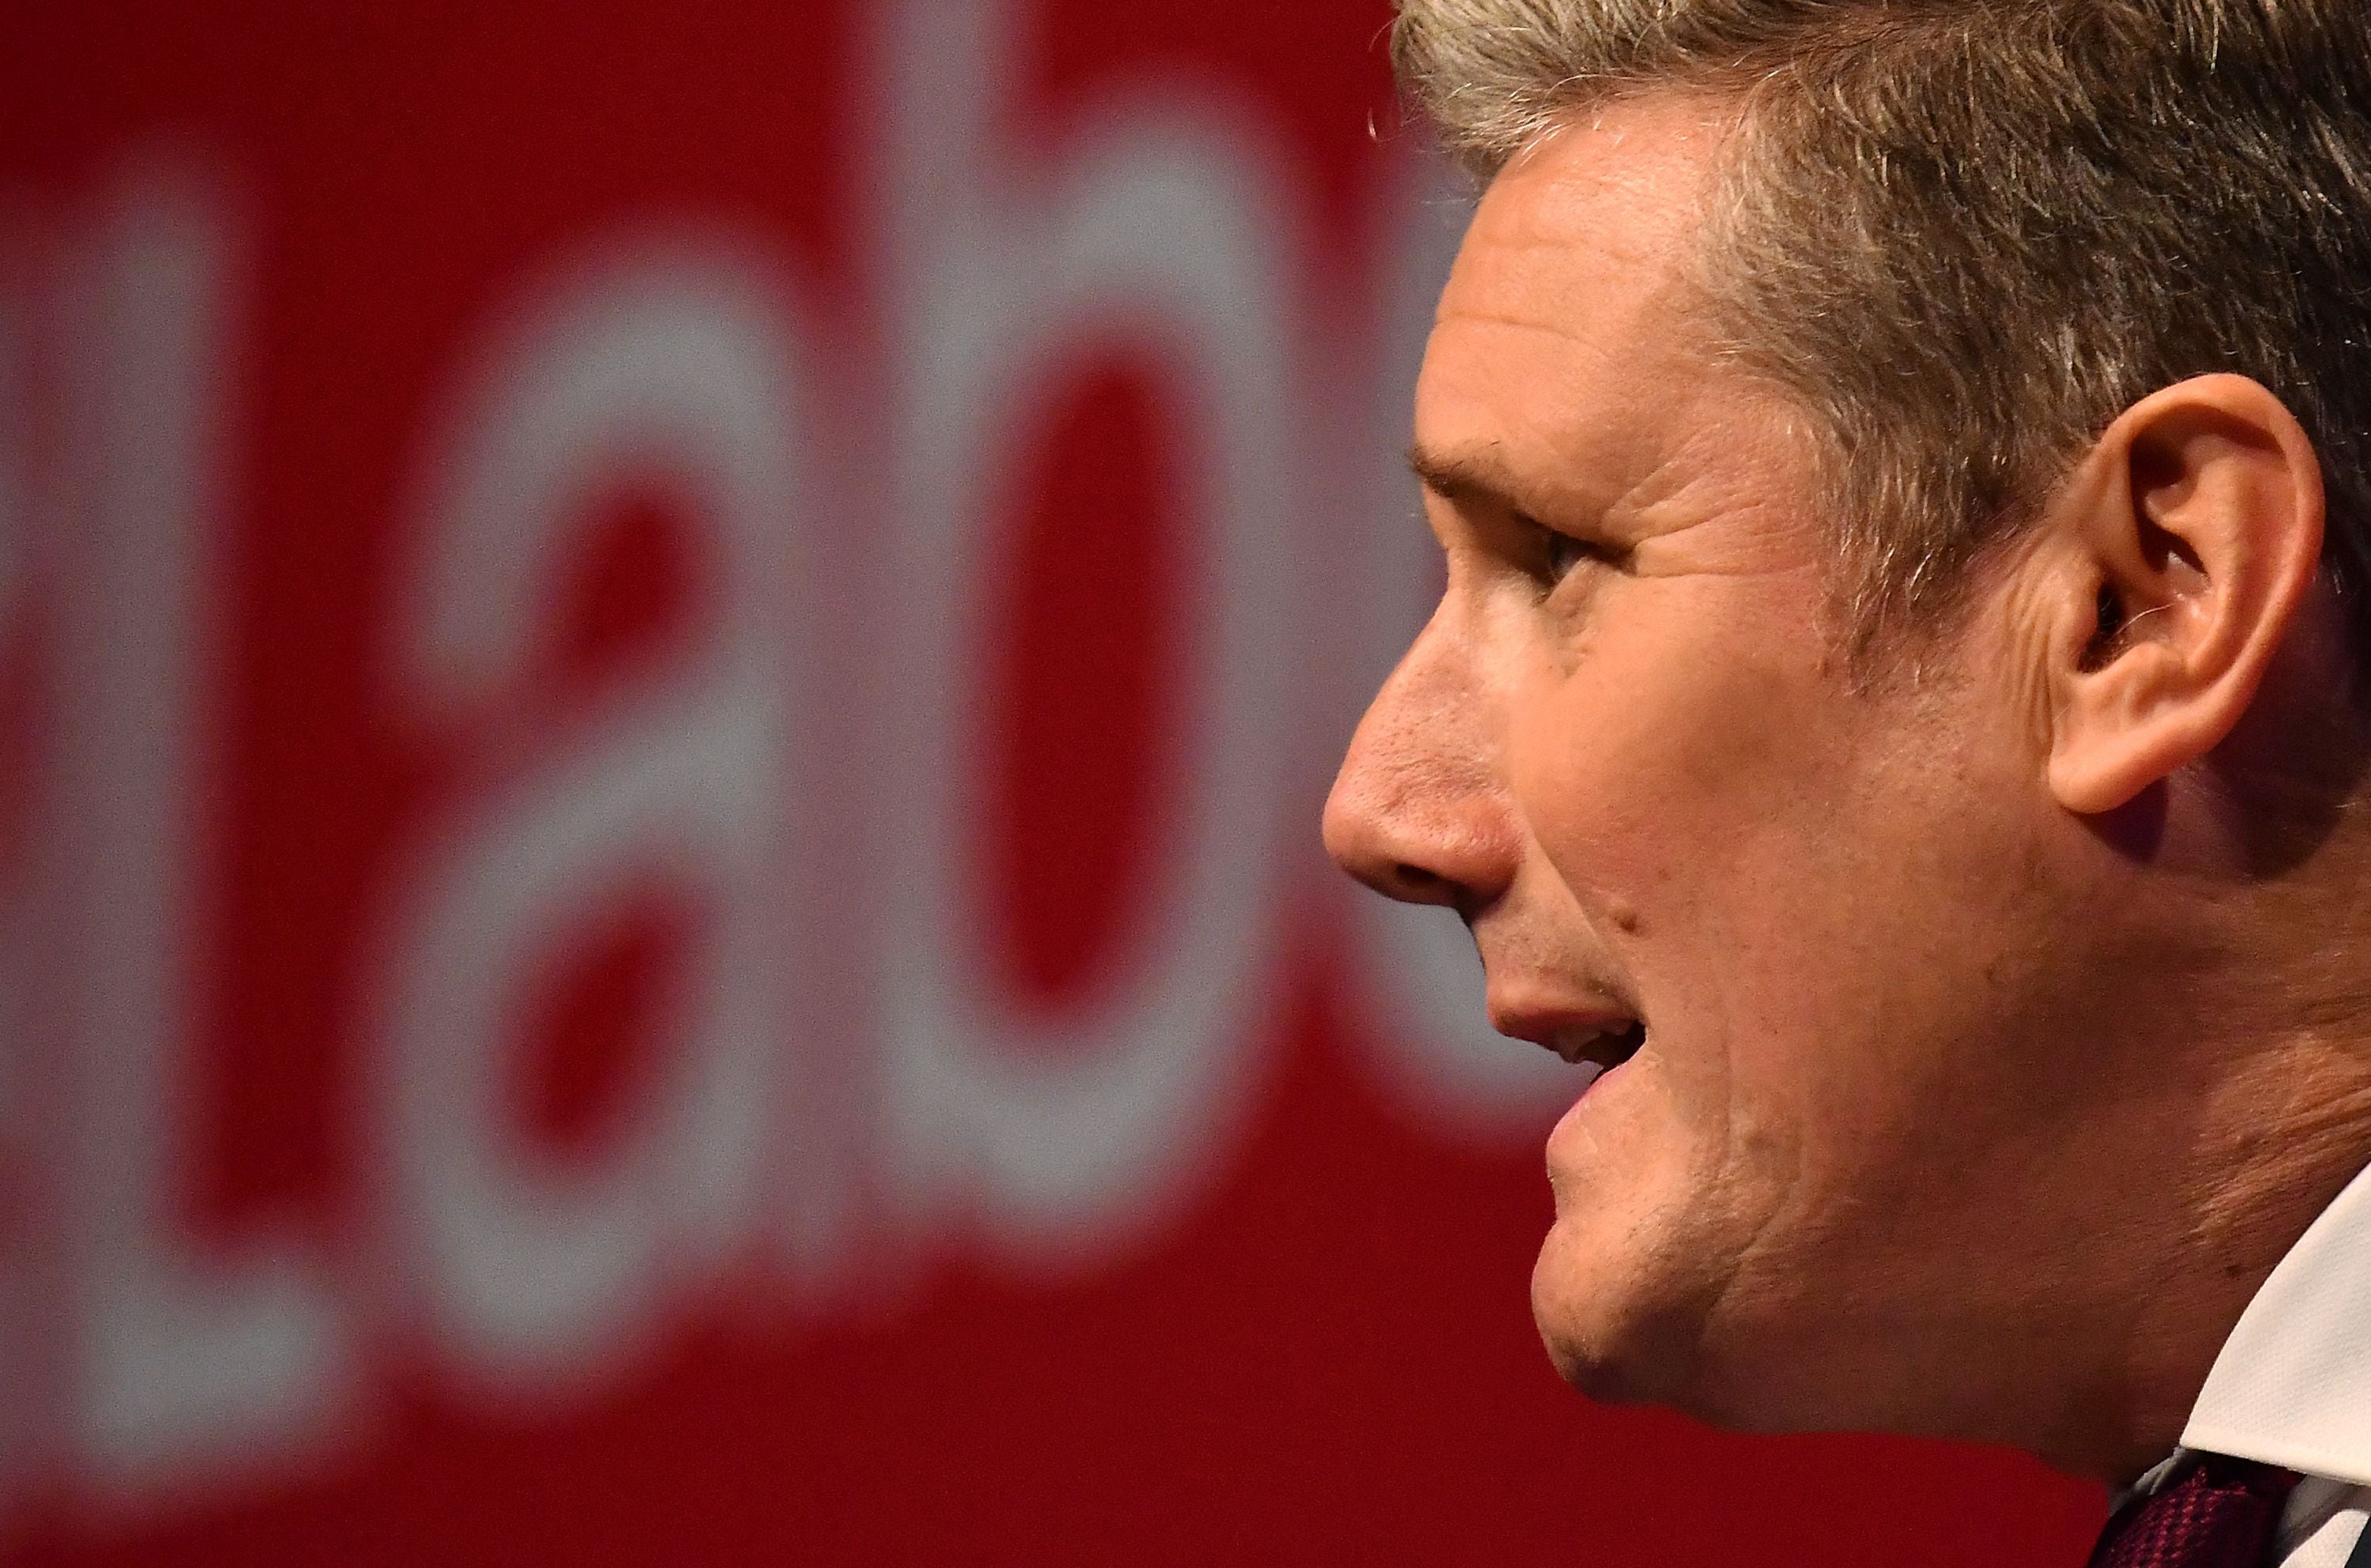 MPs and campaigners have told Keir Starmer not to abandon the pledge